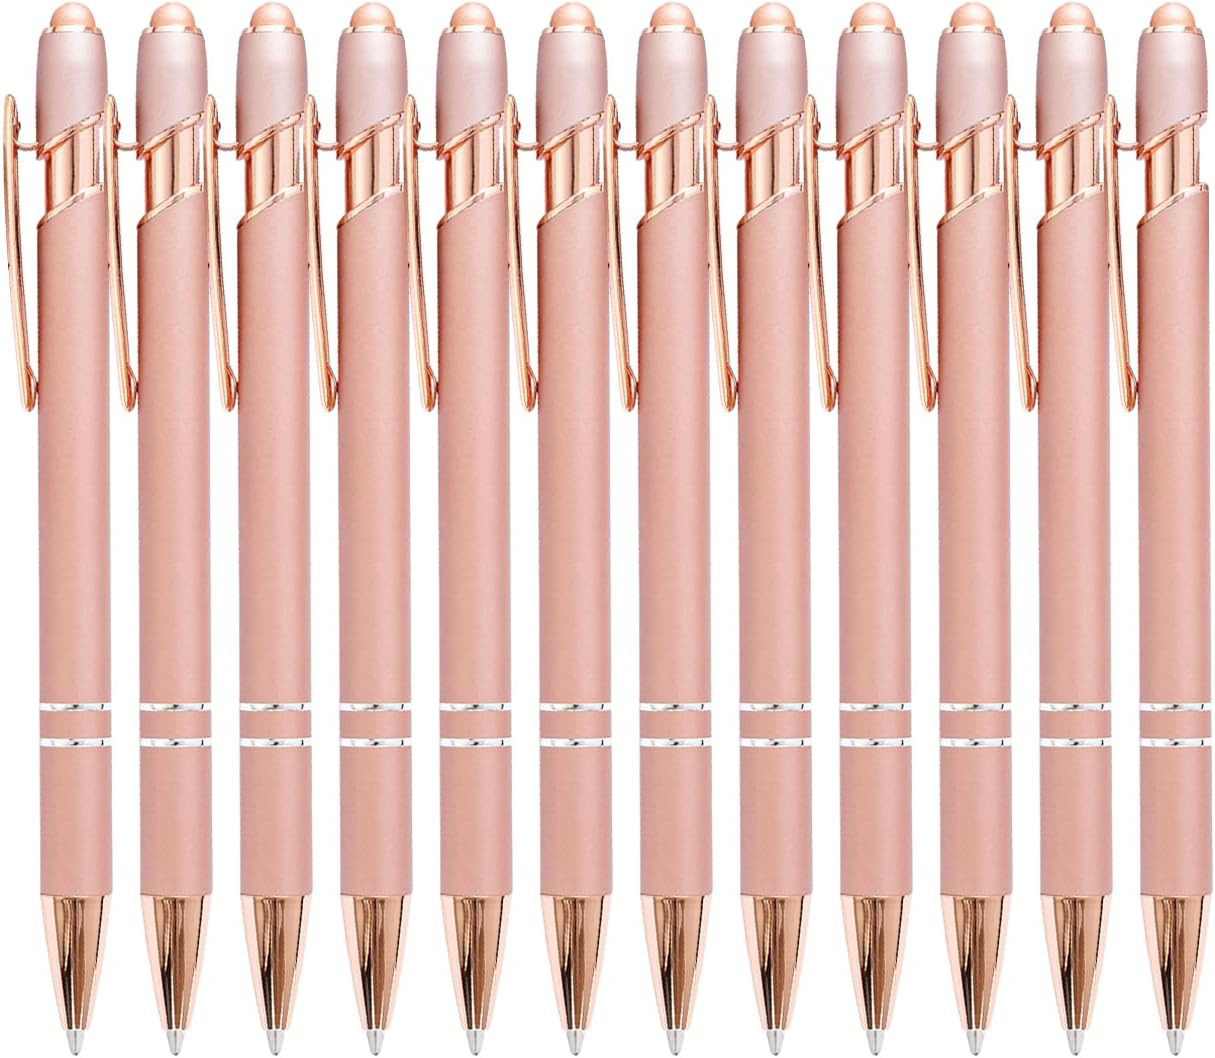 PASISIBICK 12 Pieces Rose Gold Ballpoint Pen with Stylus Tip, 2 in 1 Stylish Met